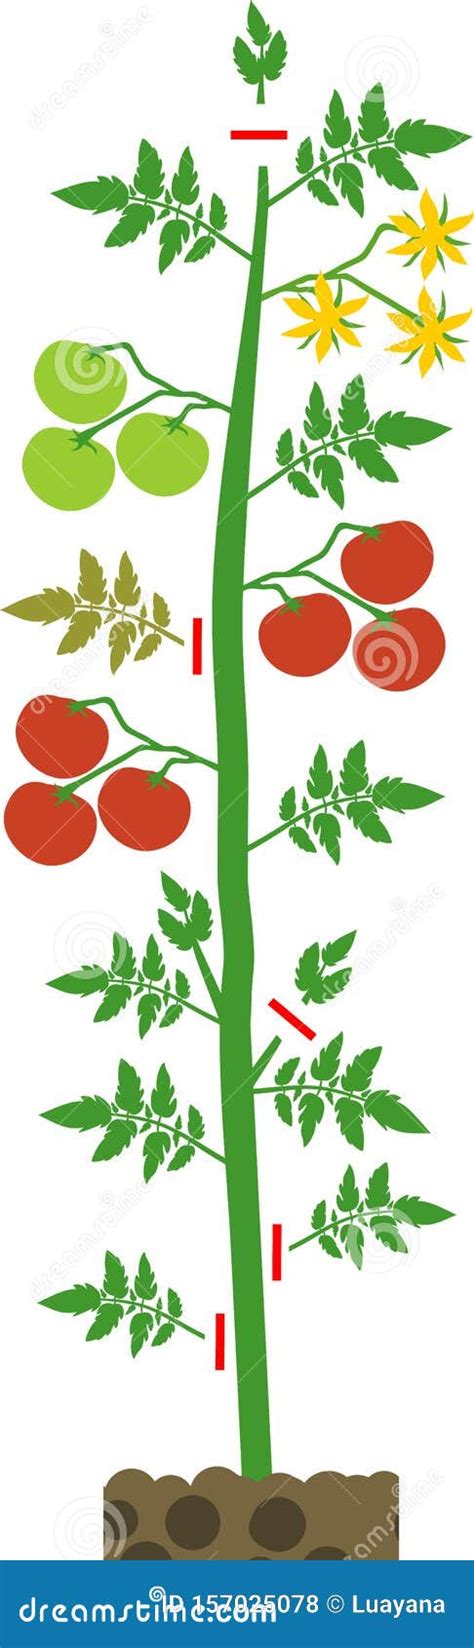 How To Prune Tomatoes Plant Tomato Pruning Scheme Stock Vector